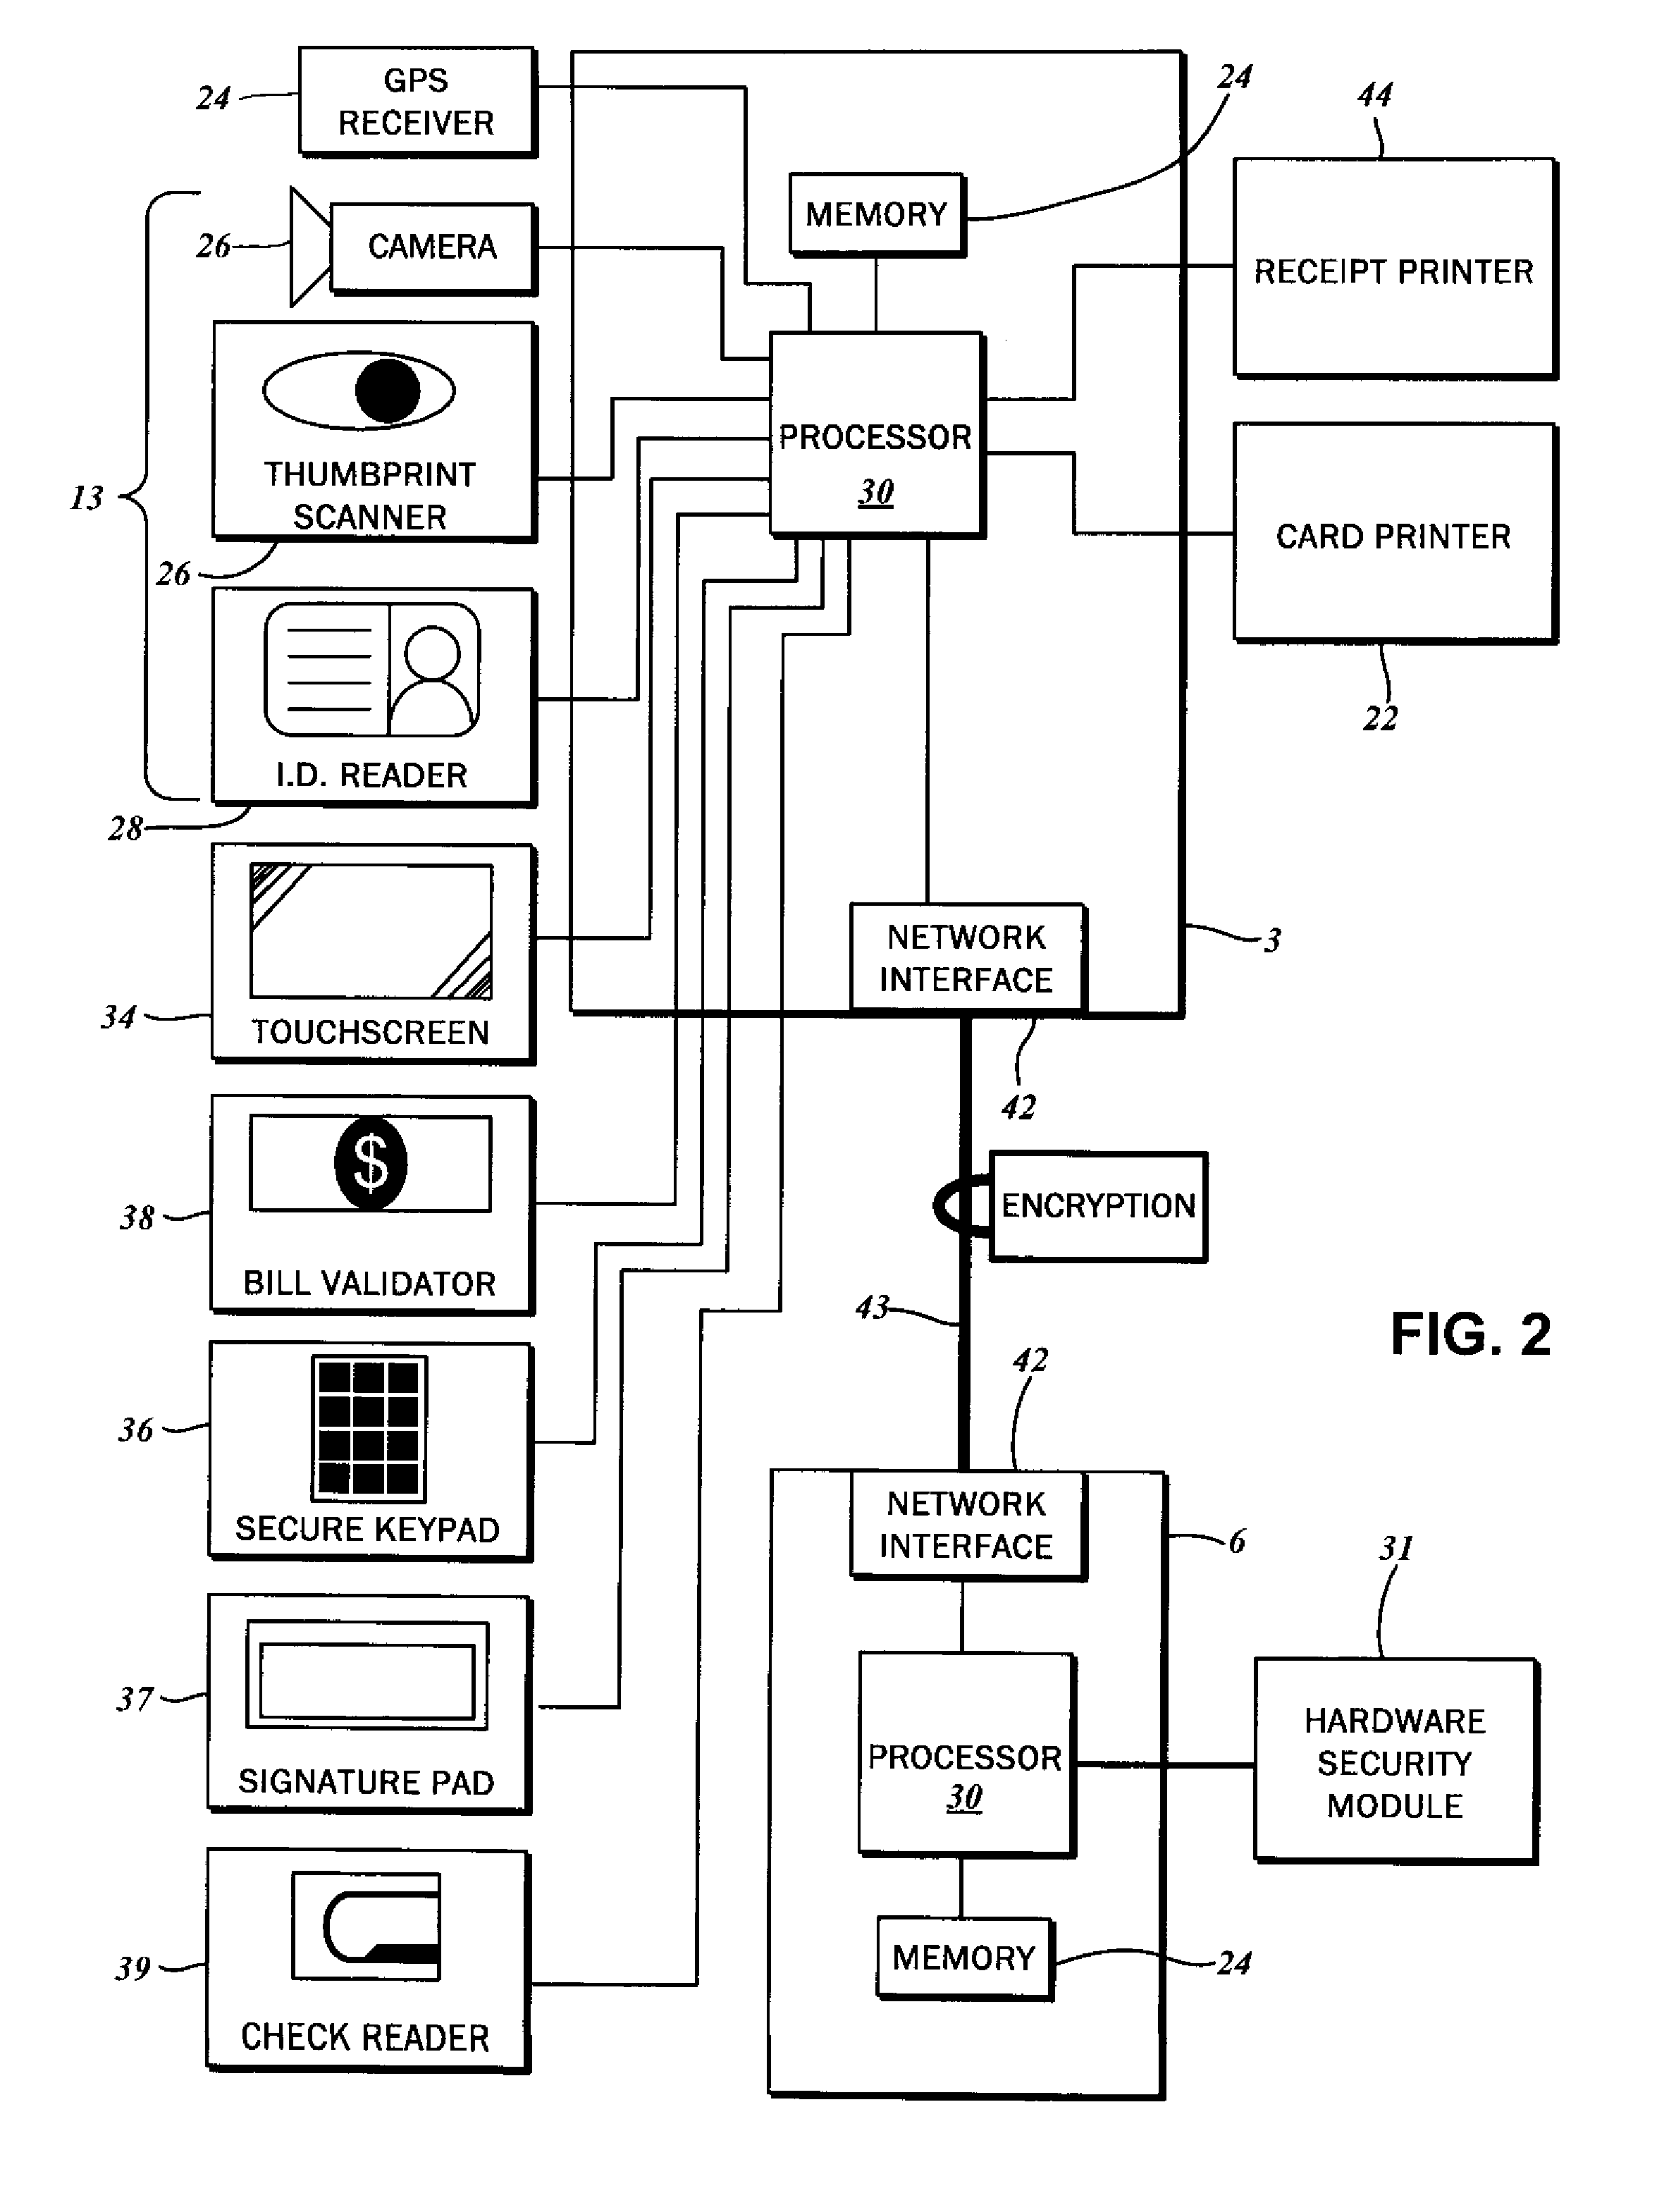 Method for verifying instant card issuance